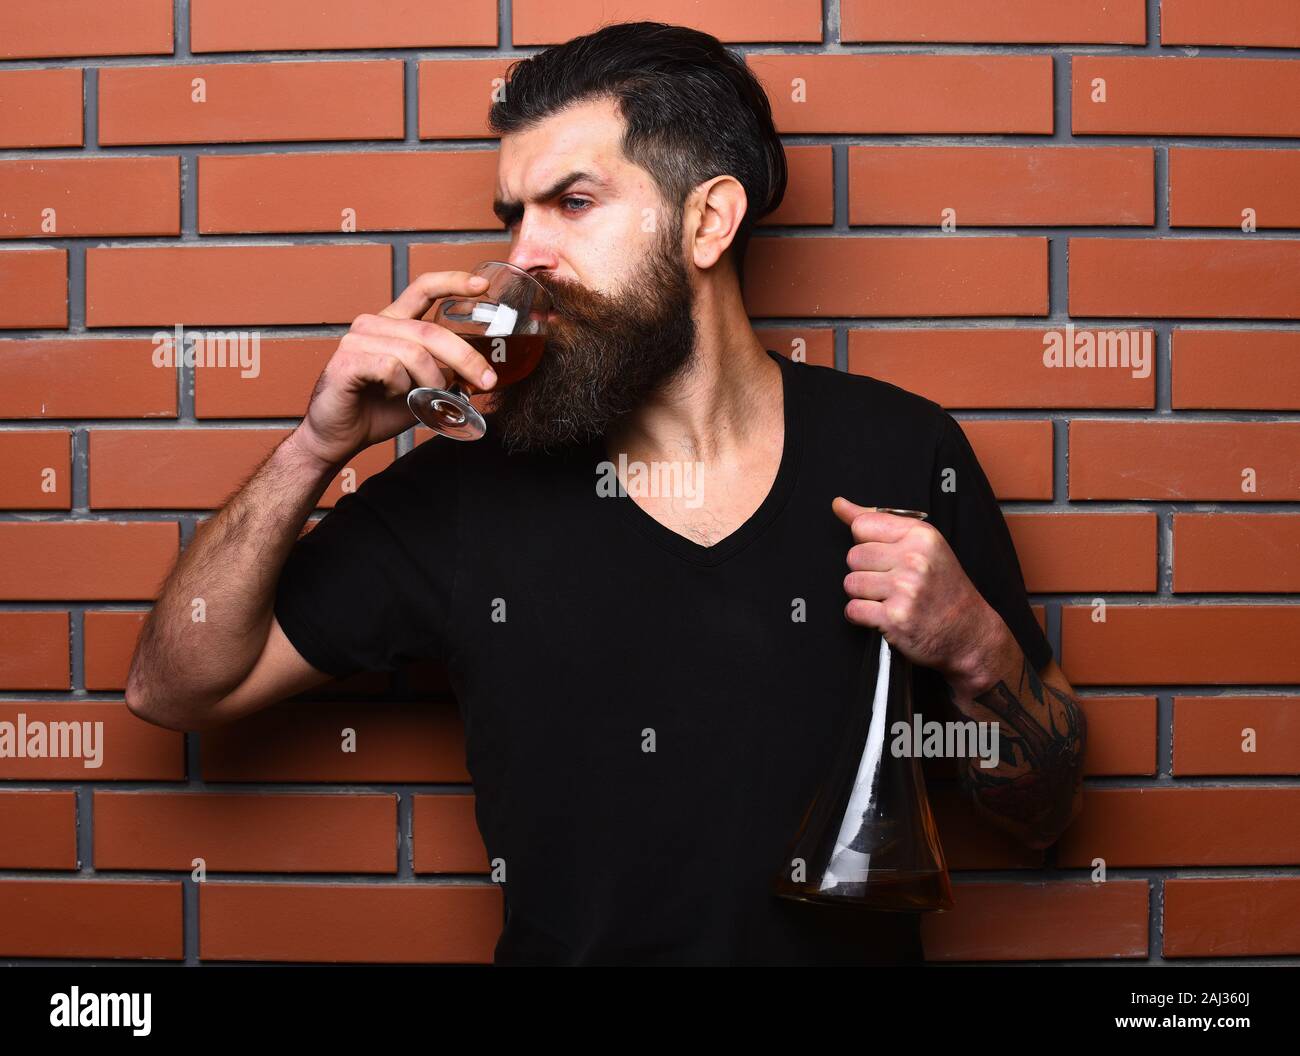 Guy with glass and bulb of cognac. Sommelier with busy face drinks brandy or whiskey. Service and tasting concept. Man with beard and mustache holds alcoholic beverage on brick wall background. Stock Photo